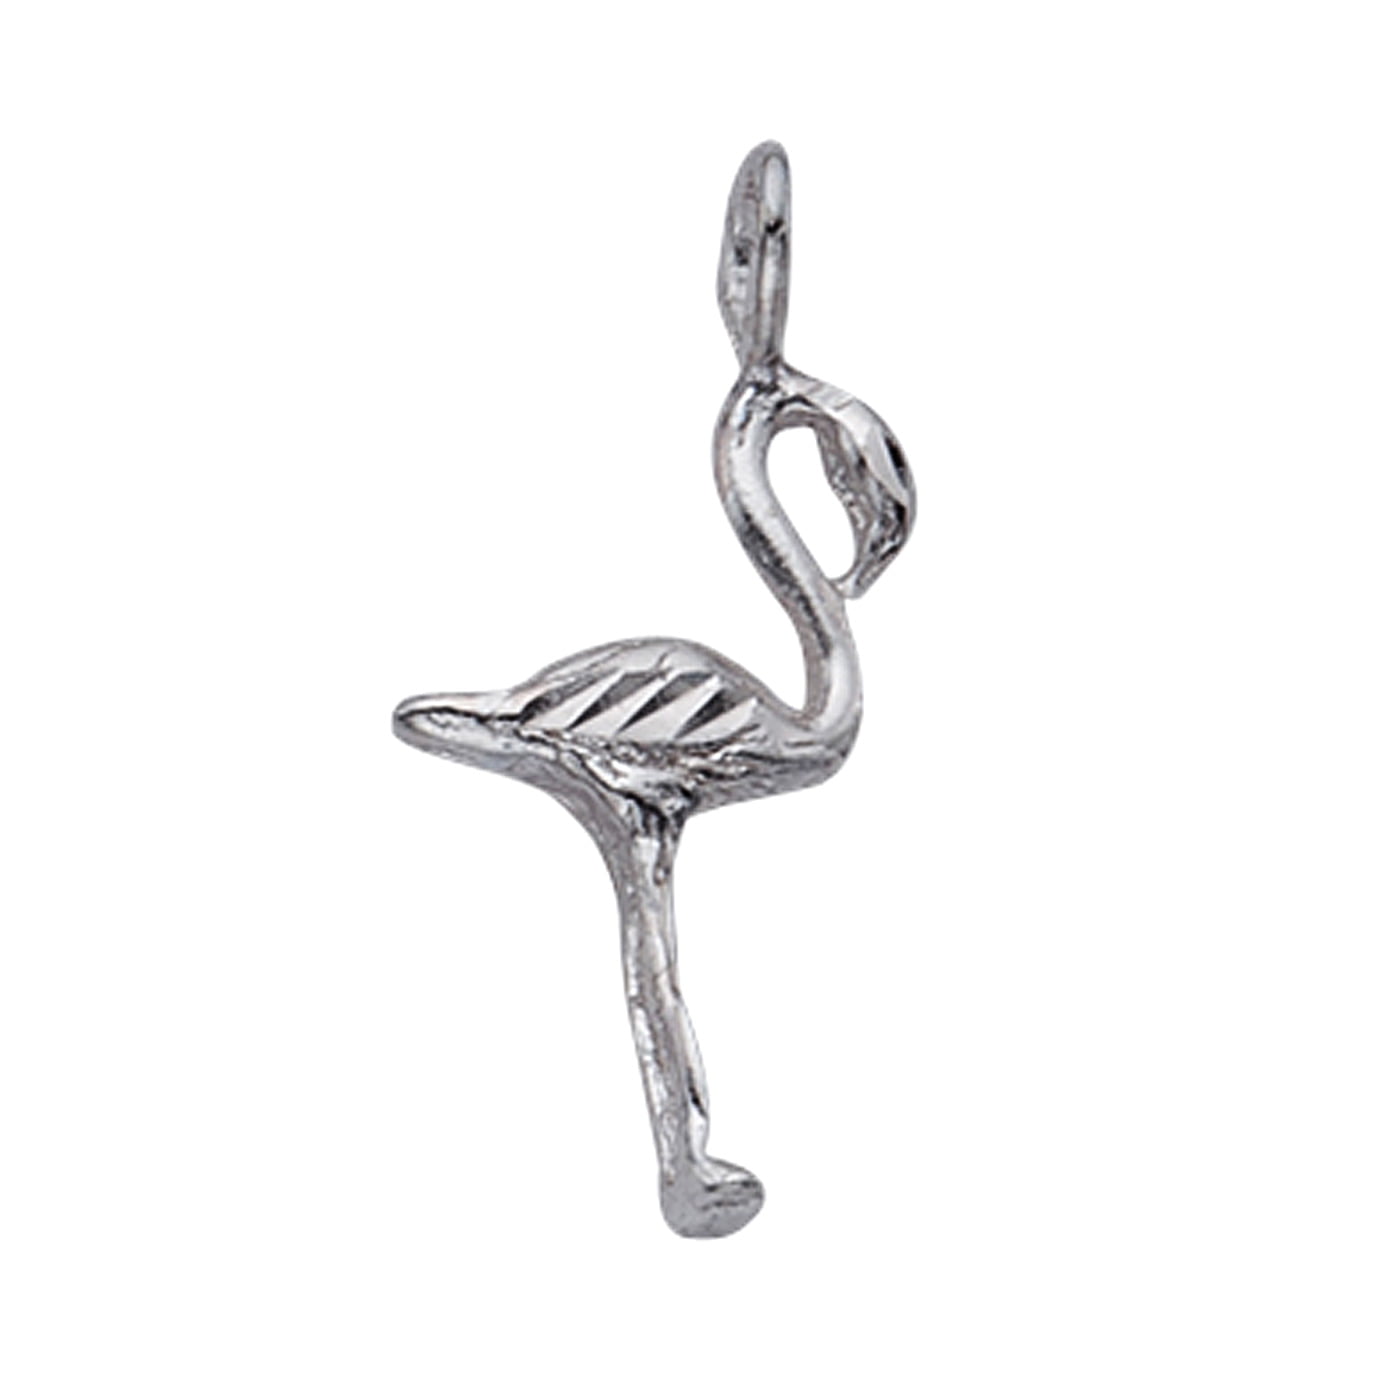 COOL Squirrel outline Charm dangle bead Sterling Silver 925 energy balance Jewel 